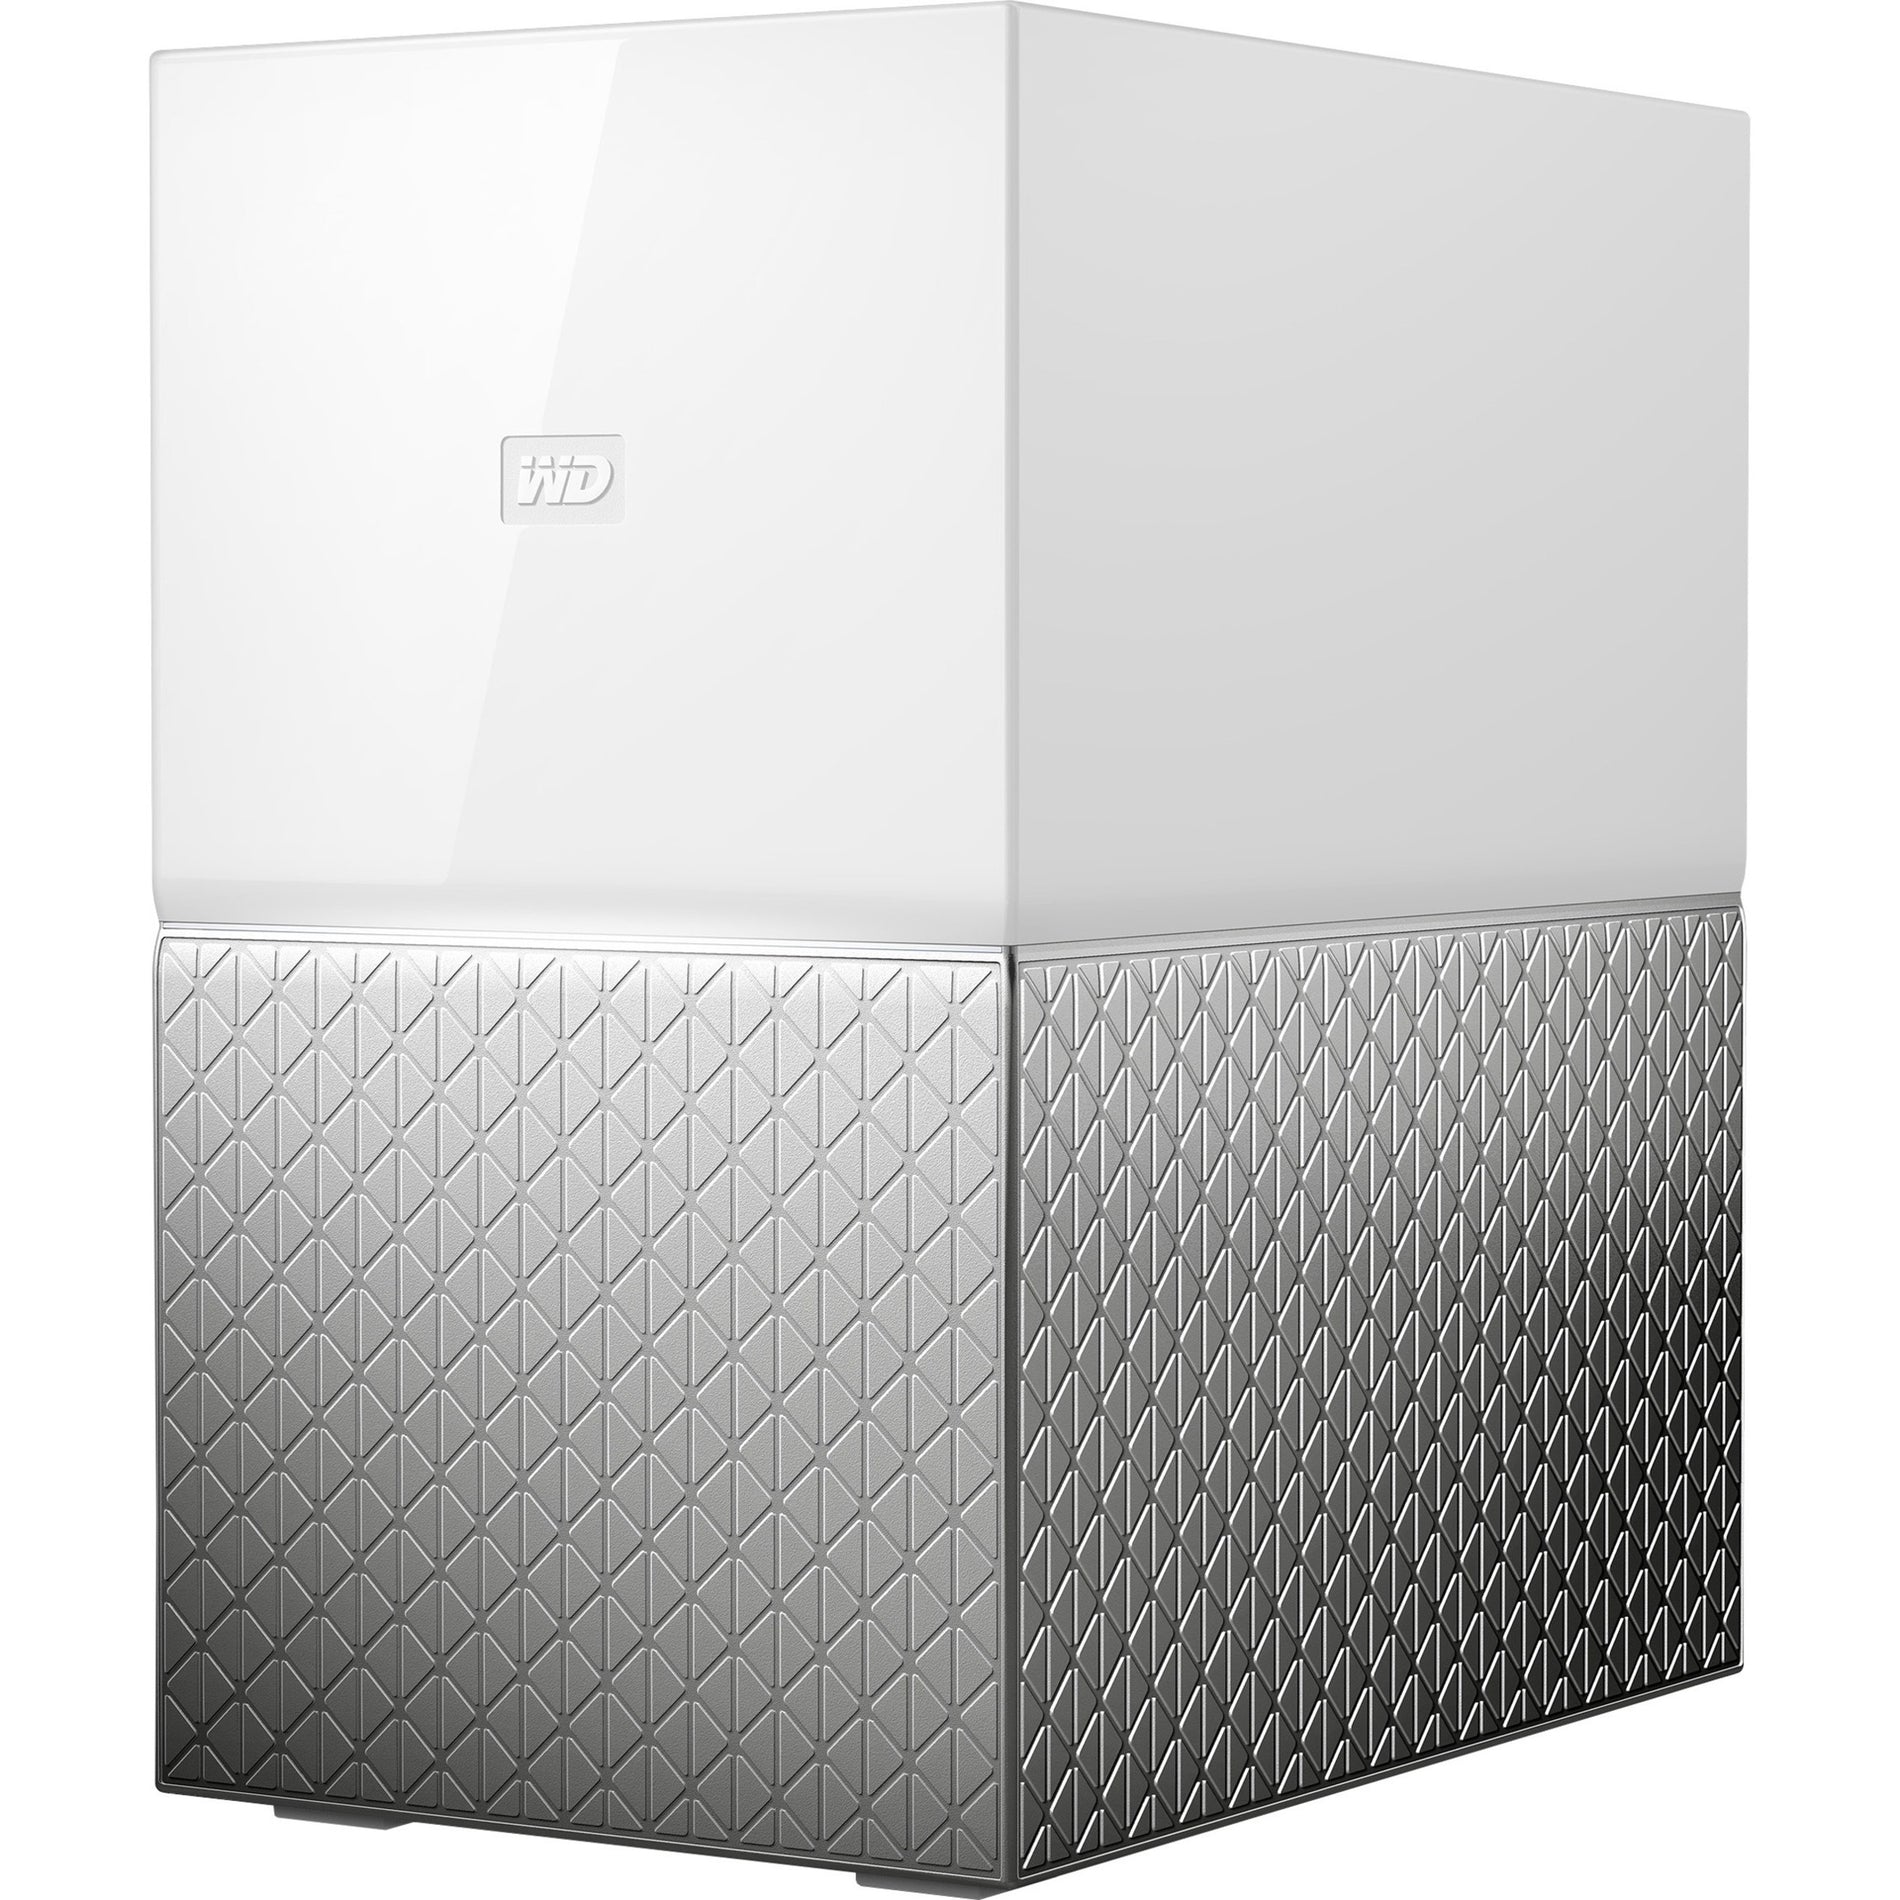 WD My Cloud Home Duo Personal Cloud Storage (WDBMUT0040JWT-NESN)